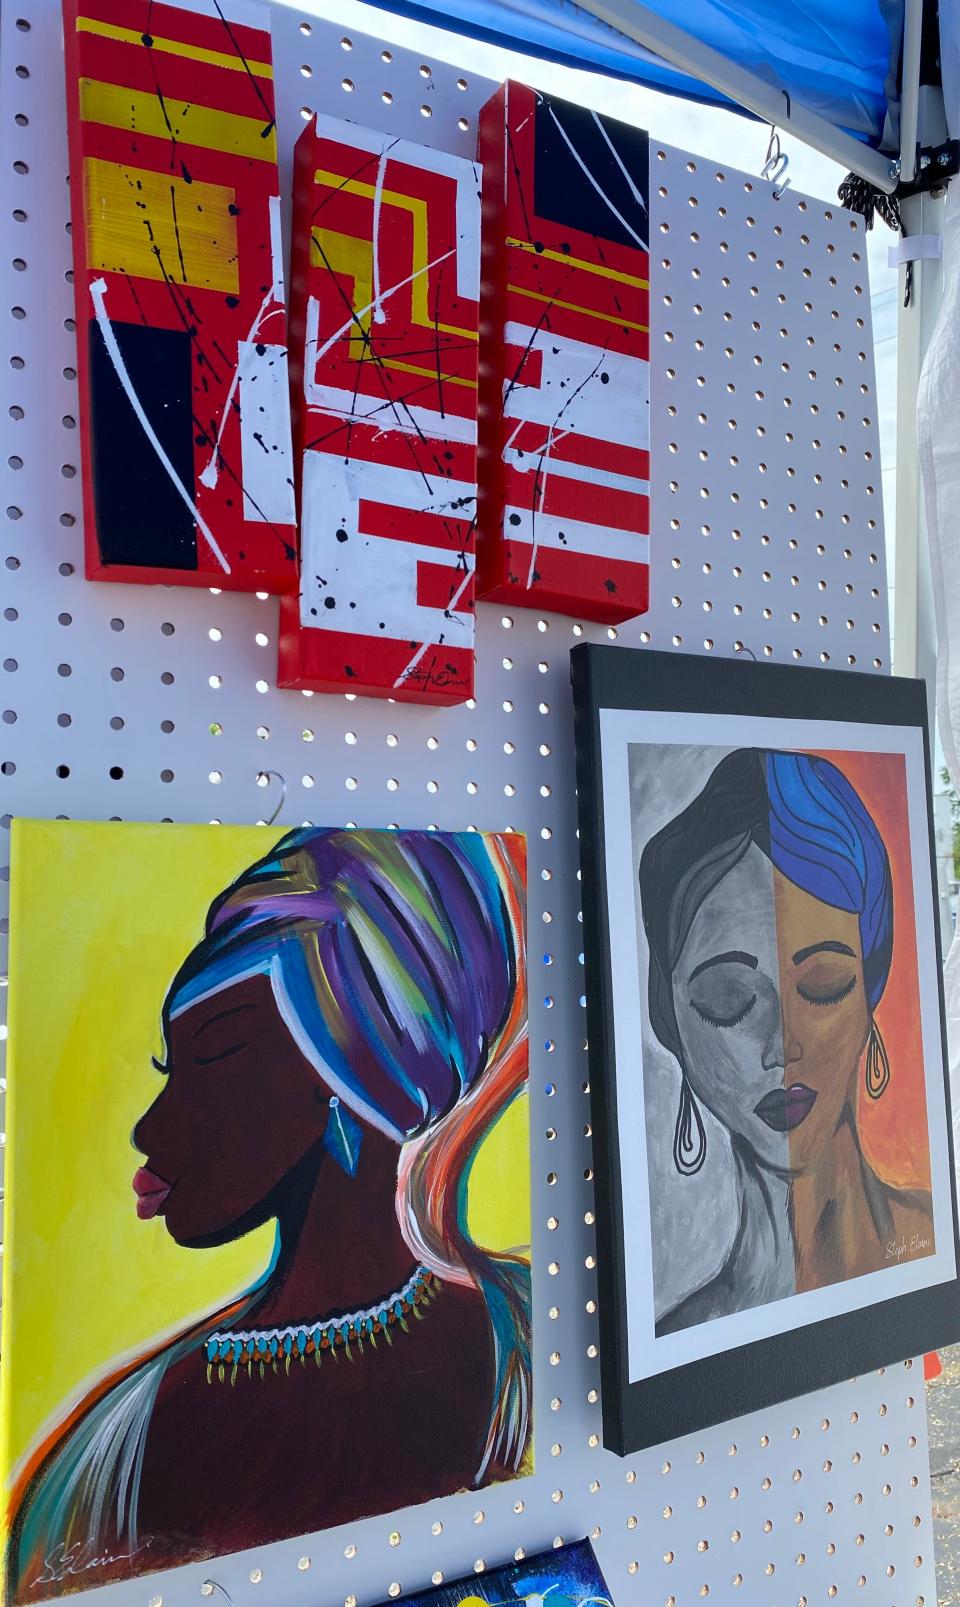 Artwork is displayed at a booth at last summer's African American Arts Festival in Canton. This year's event is 10 a.m. to 10 p.m. Friday and Saturday at Centennial Plaza in downtown Canton.